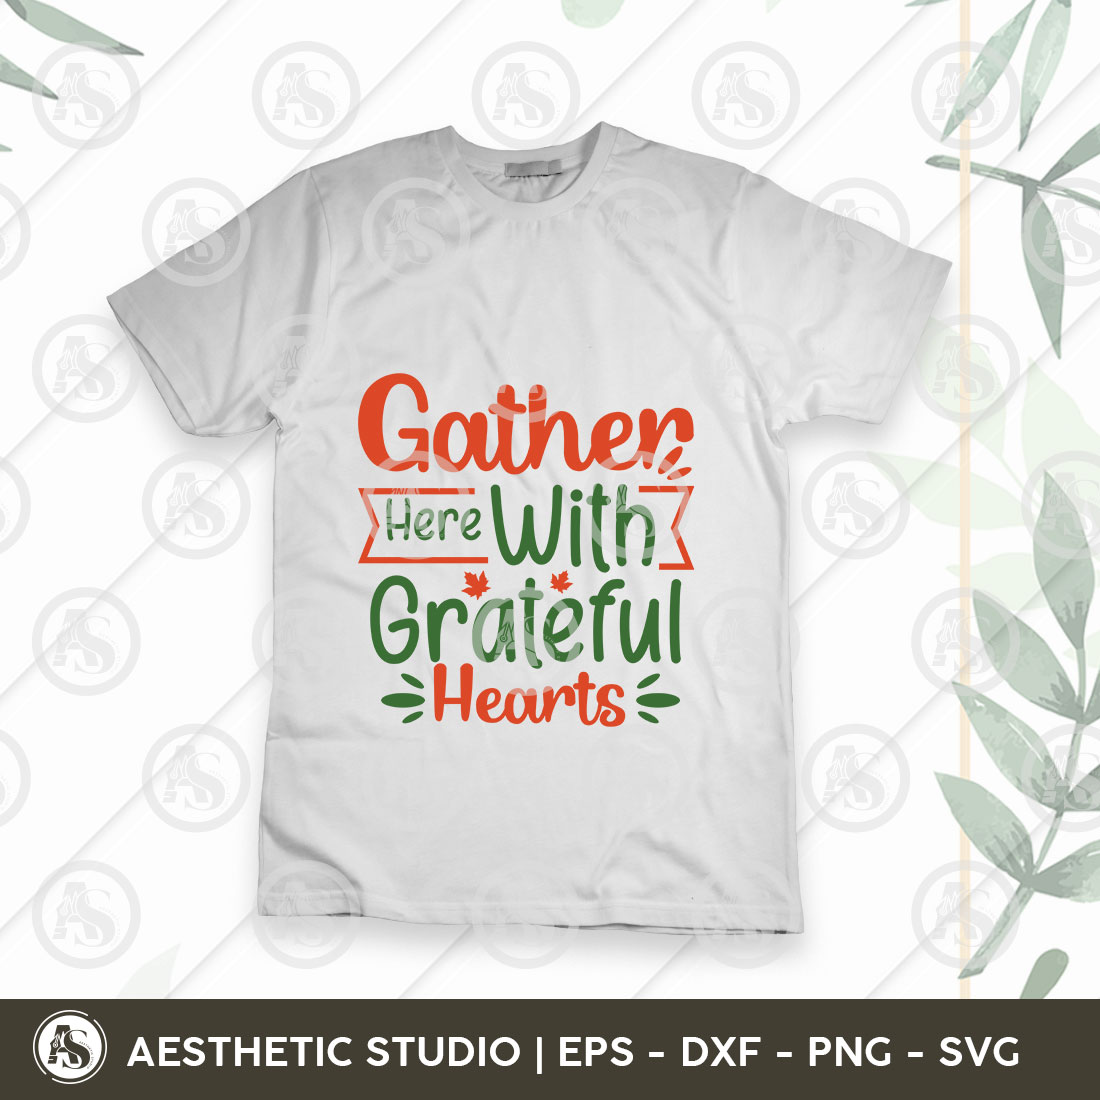 Gather Here With Grateful Hearts Svg, Thanksgiving Svg, Gift For Thanksgiving Shirt, Fall Svg, Autumn Svg, Thankful Svg, Pumpkin svg, Turkey svg, Gobble Svg, Pumpkin Spice, Fall Leaves Svg, Fall Vibes Svg, Grateful svg, Thanksgiving Quote, Cut Files for Cricut, preview image.